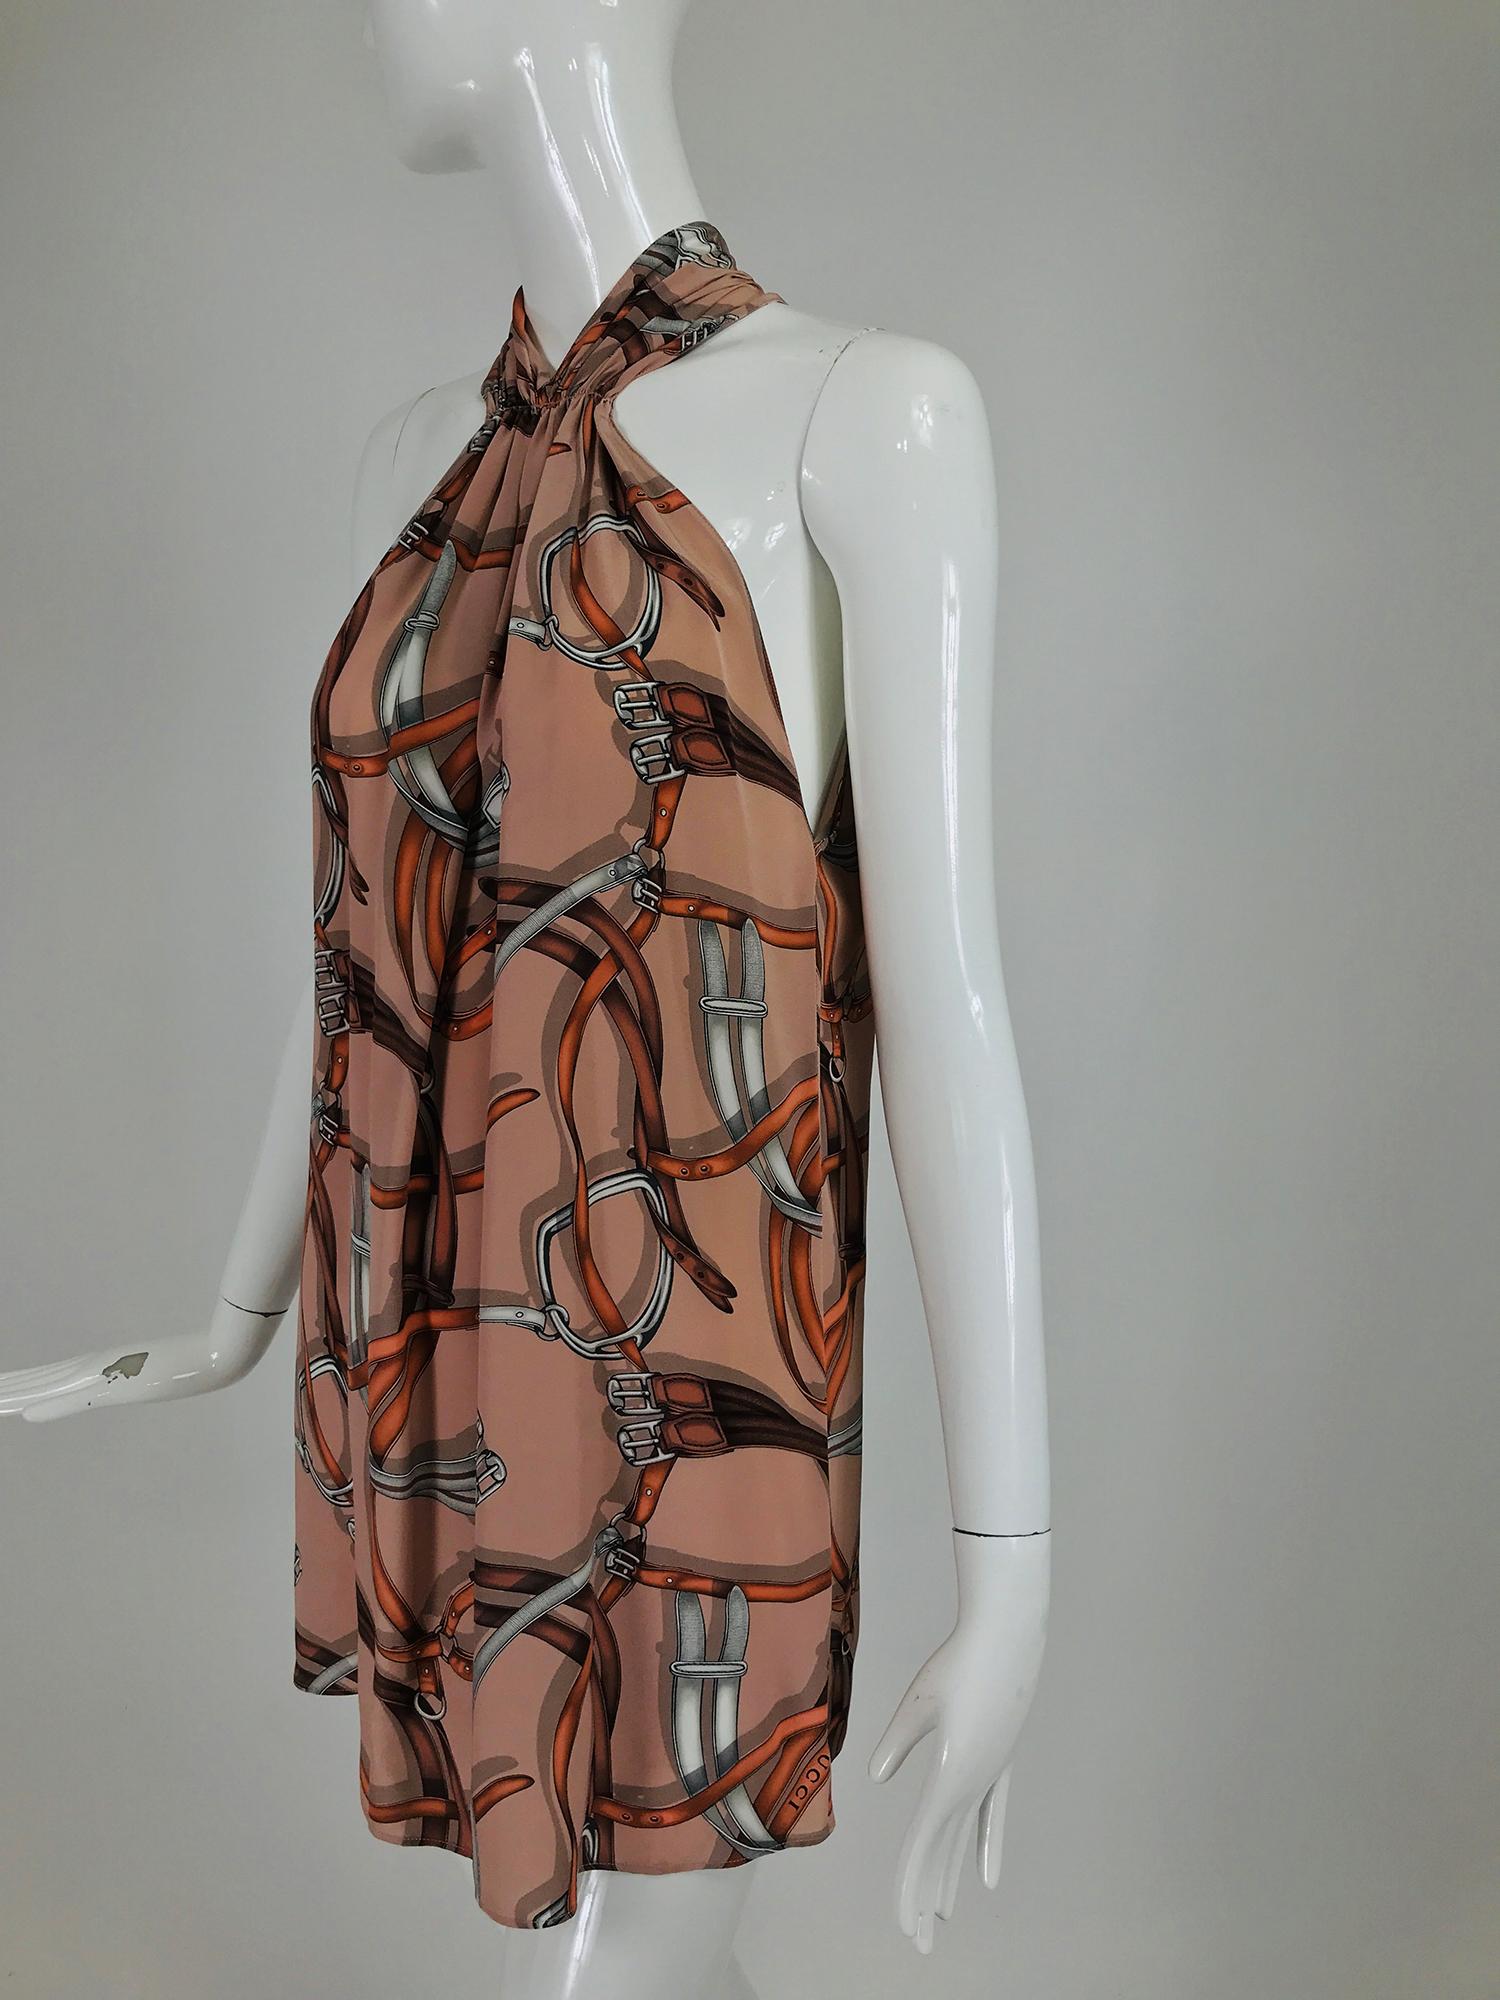 Gucci Equestrian label stirrup and harness print silk halter tunic marked size 48.  Shirred neckline, sleeveless tunic/top with deep arm openings. Closes at the back with a zipper and hook and eye.  Looks barely, if ever, worn. Fits like a large but